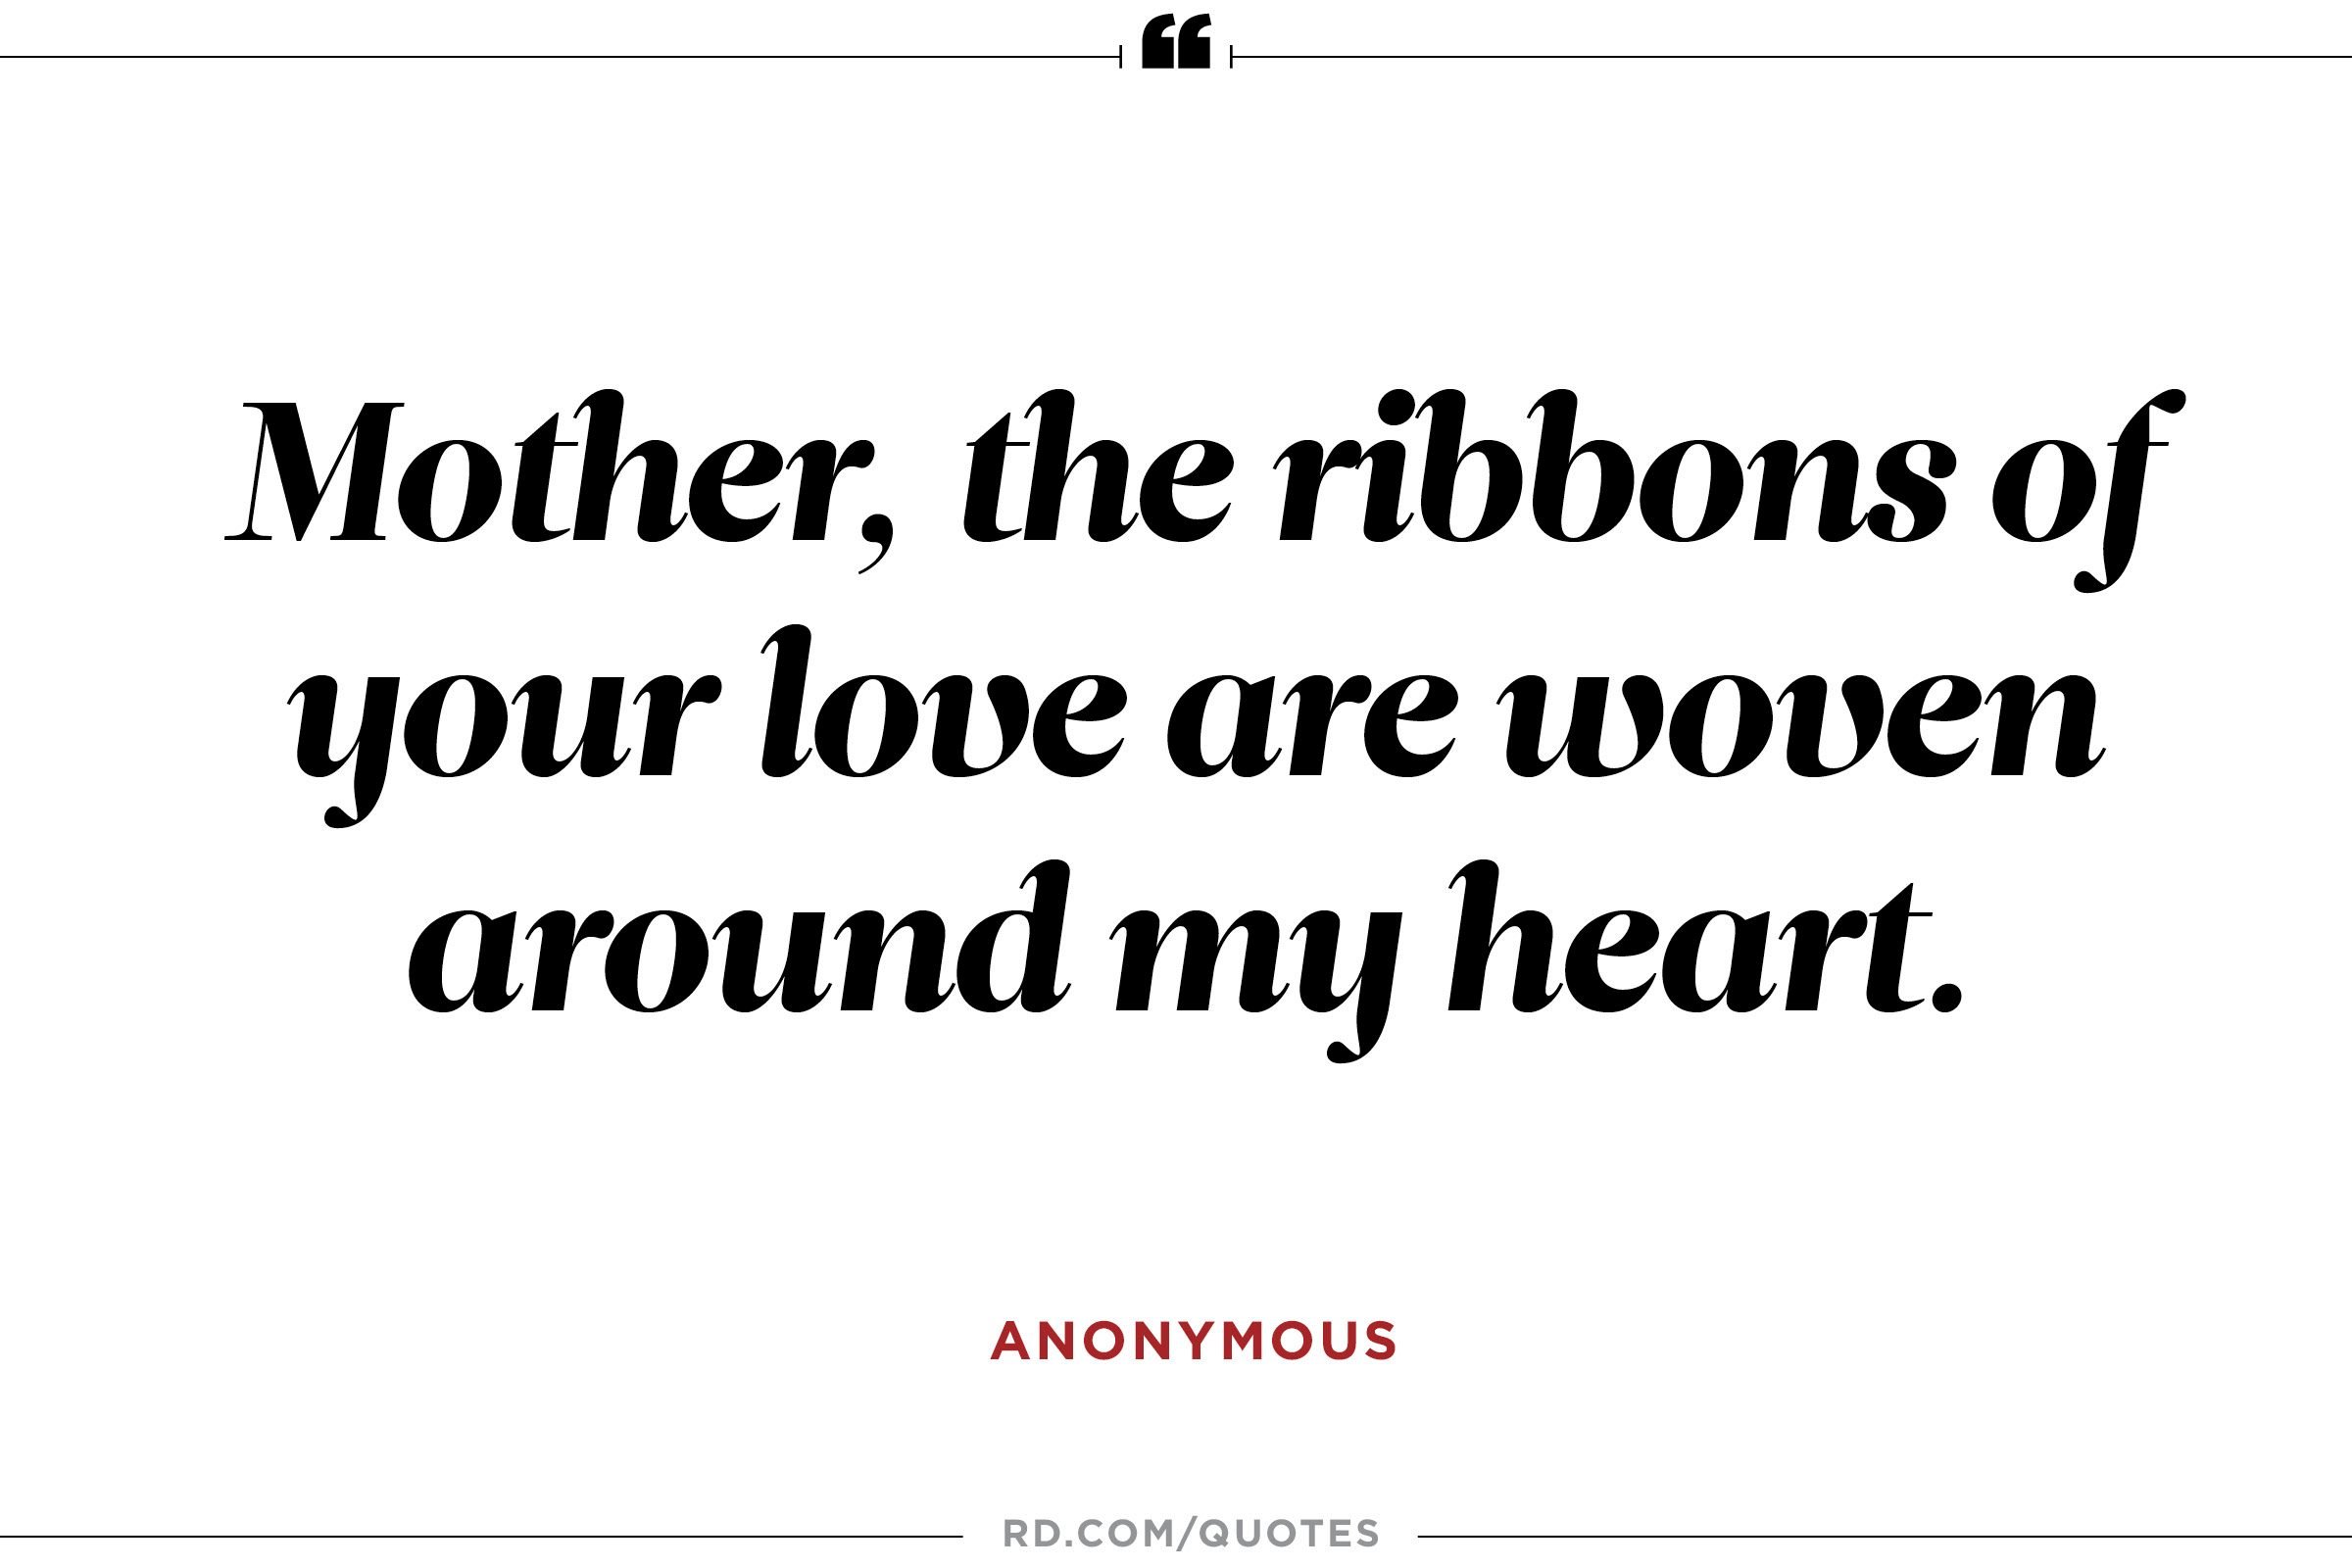 Mother the ribbons of your love